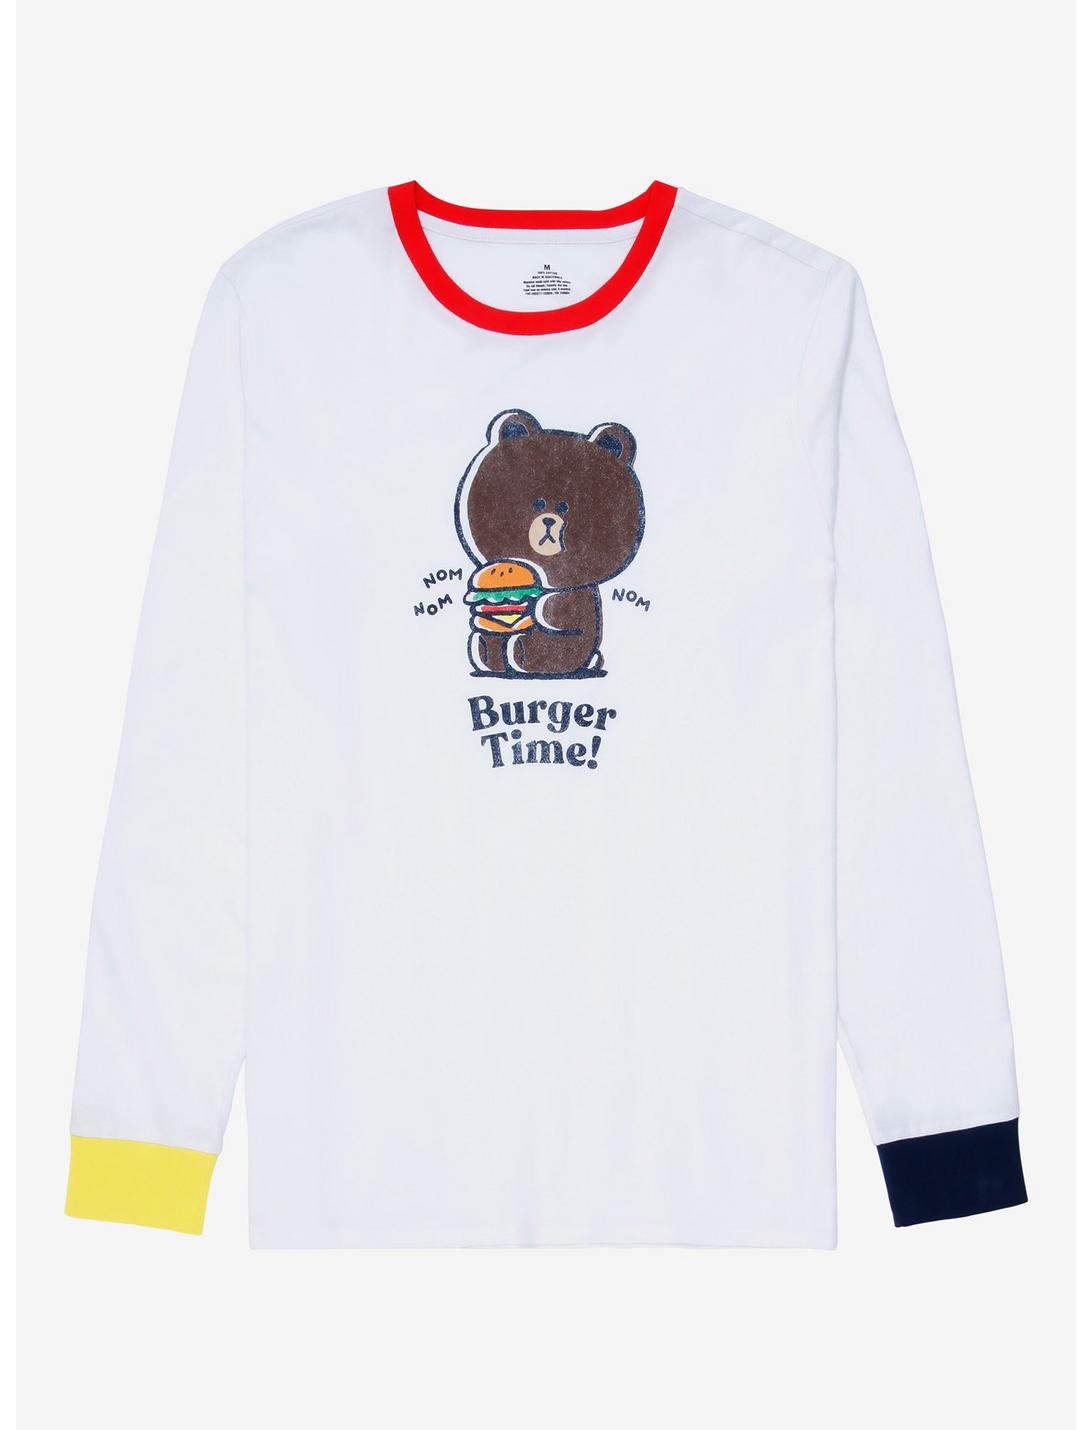 LINE FRIENDS BROWN & FRIENDS Burger Time Long Sleeve T-Shirt - BoxLunch Exclusive, MULTI, hi-res